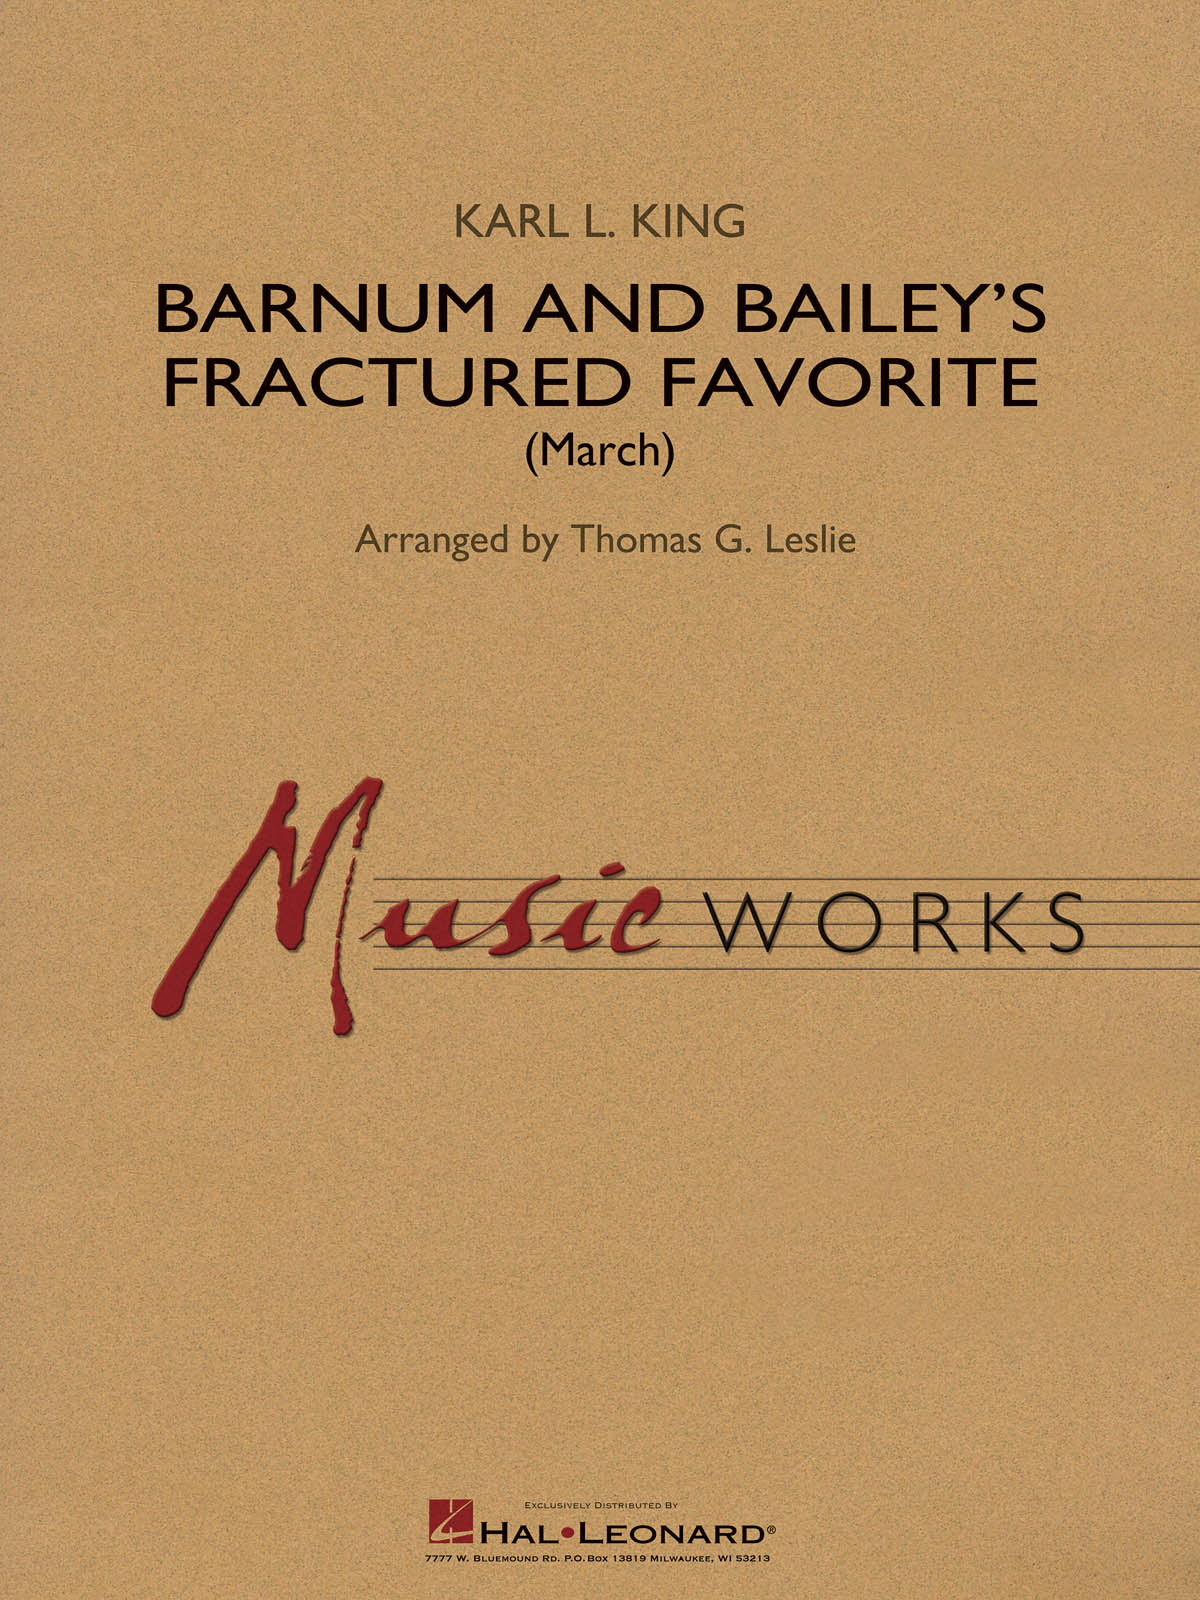 Barnum and Bailey’s Fractured Favorite